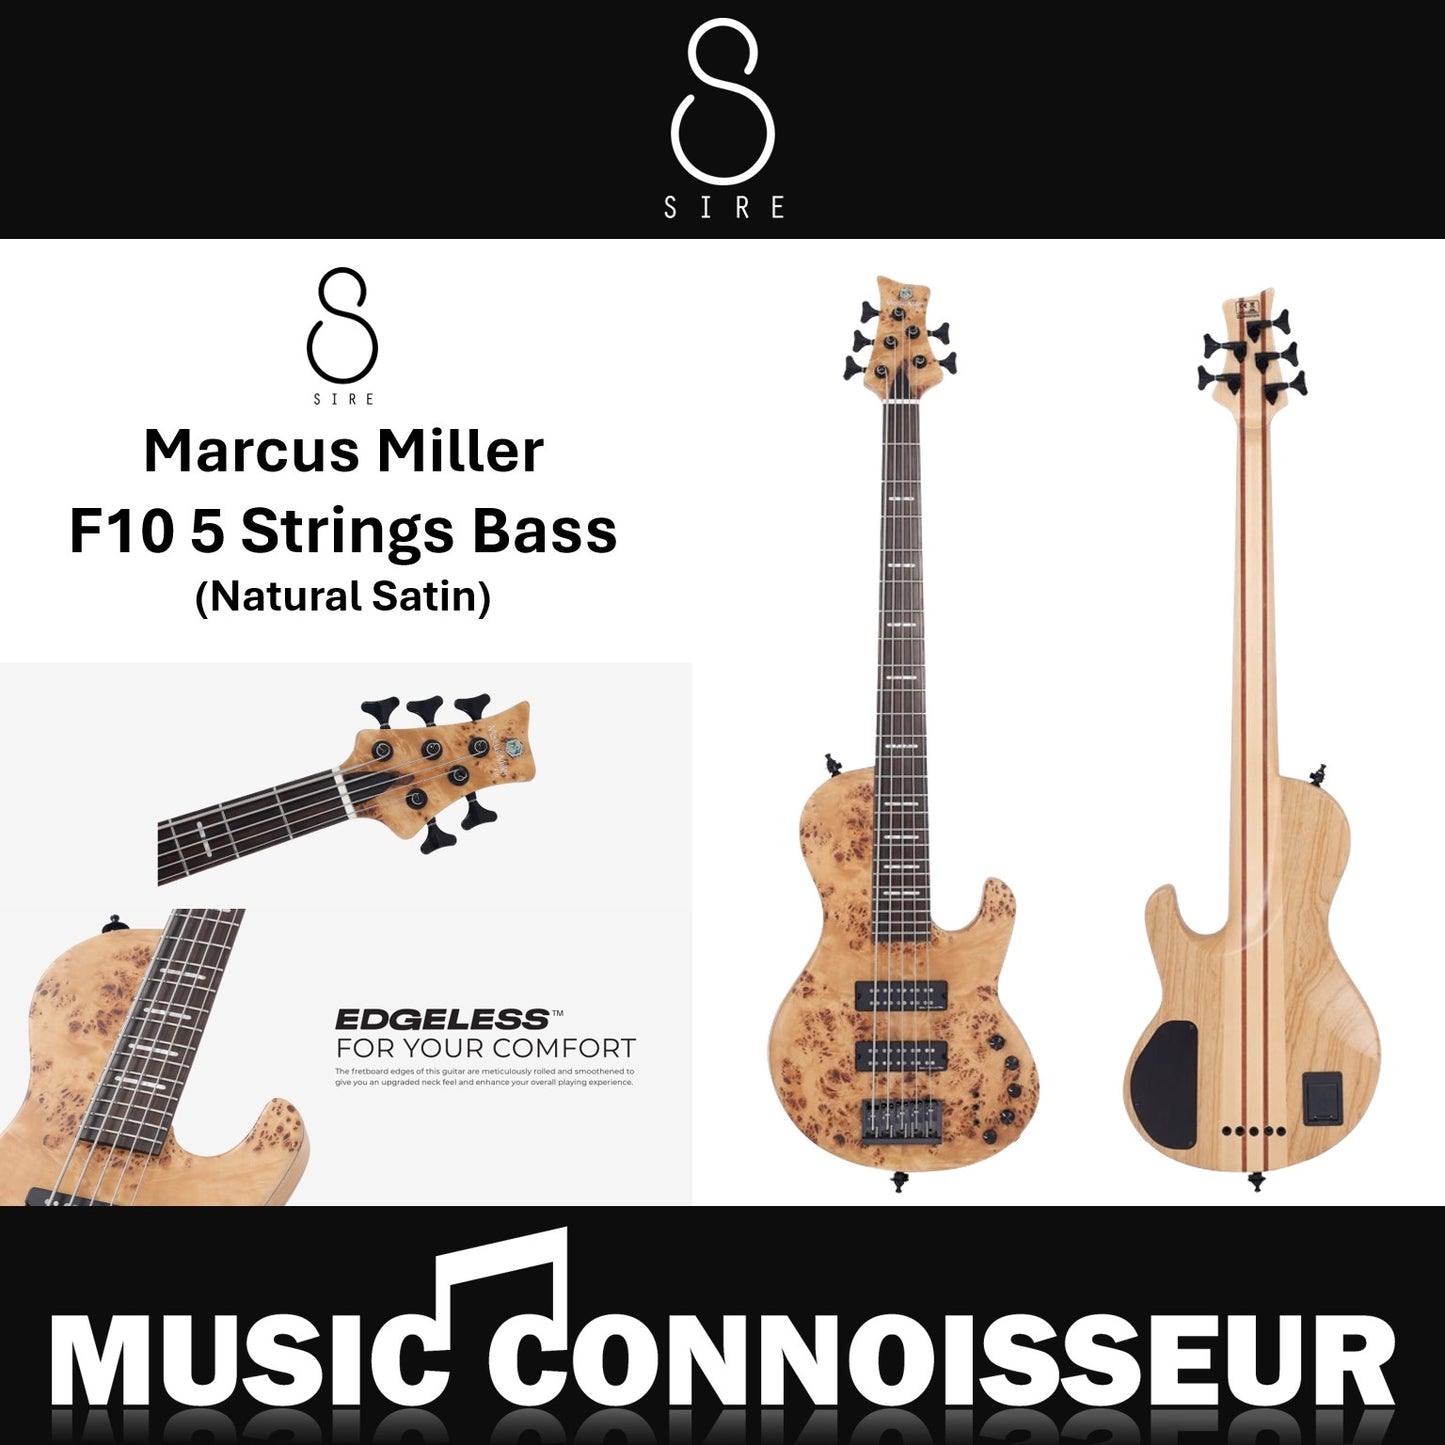 Sire Marcus Miller F10 5 Strings Bass (Natural Satin)